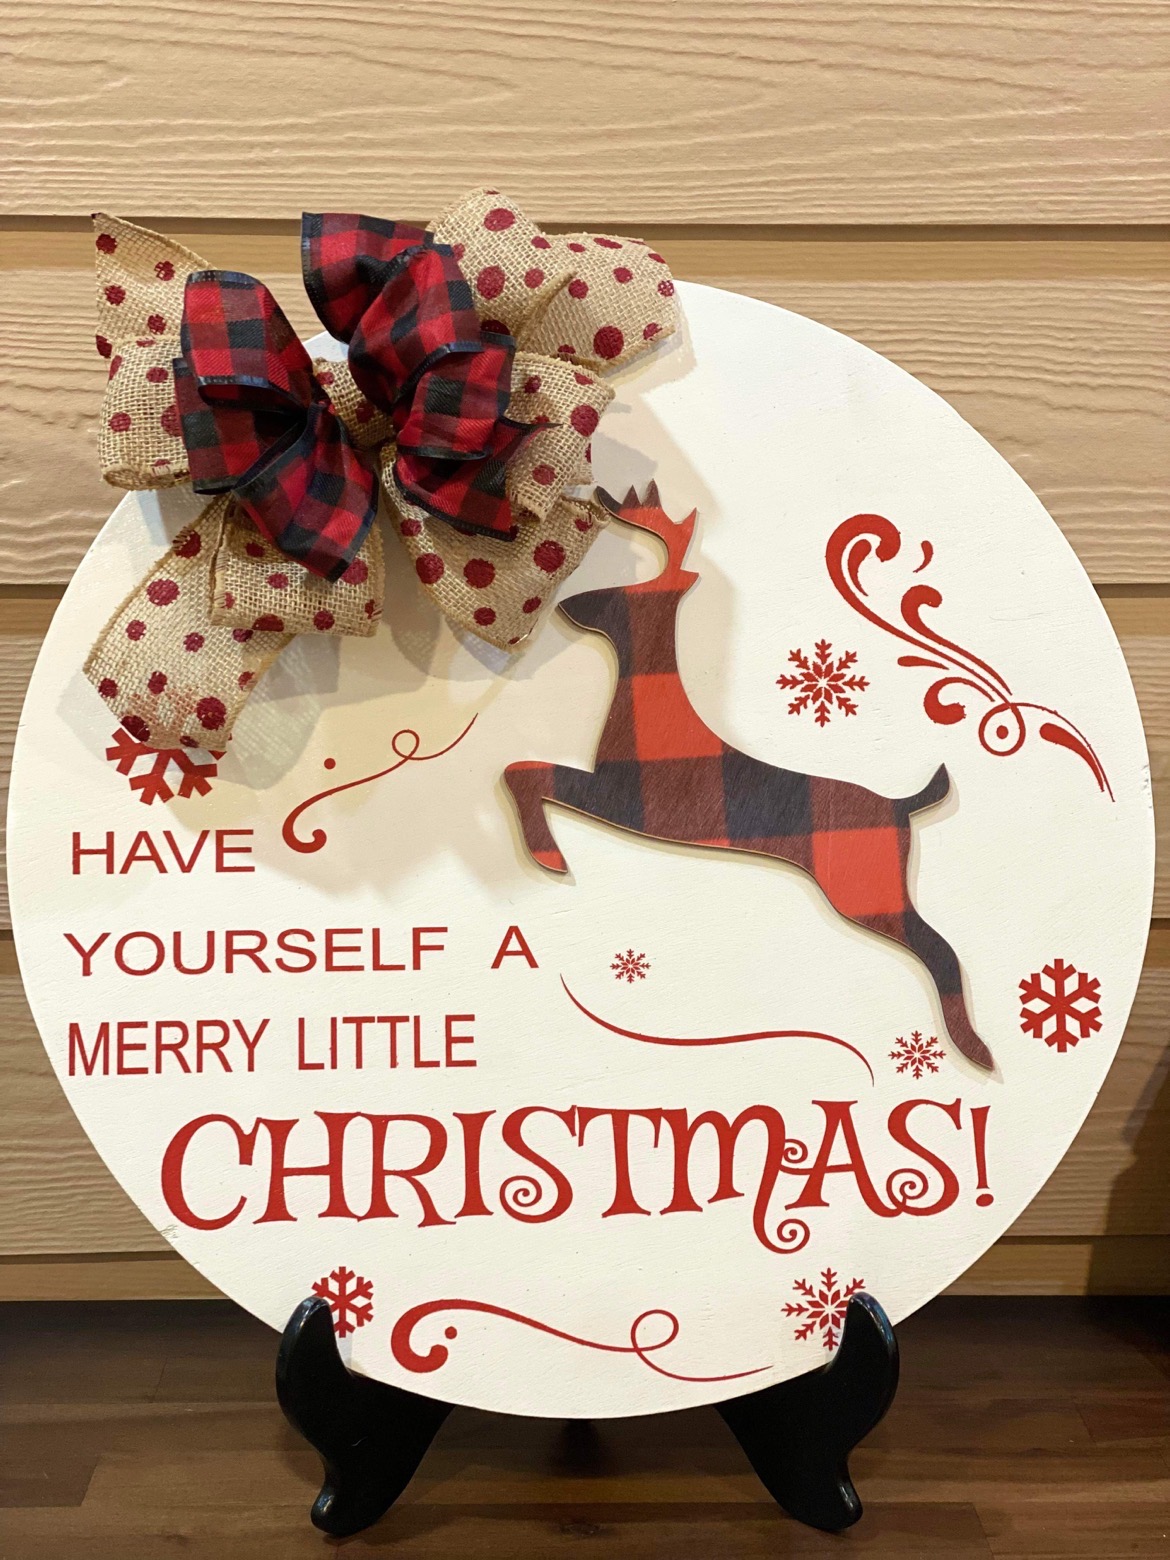 HAVE YOURSELF A MERRY LITTLE CHRISTMAS made with sublimation printing